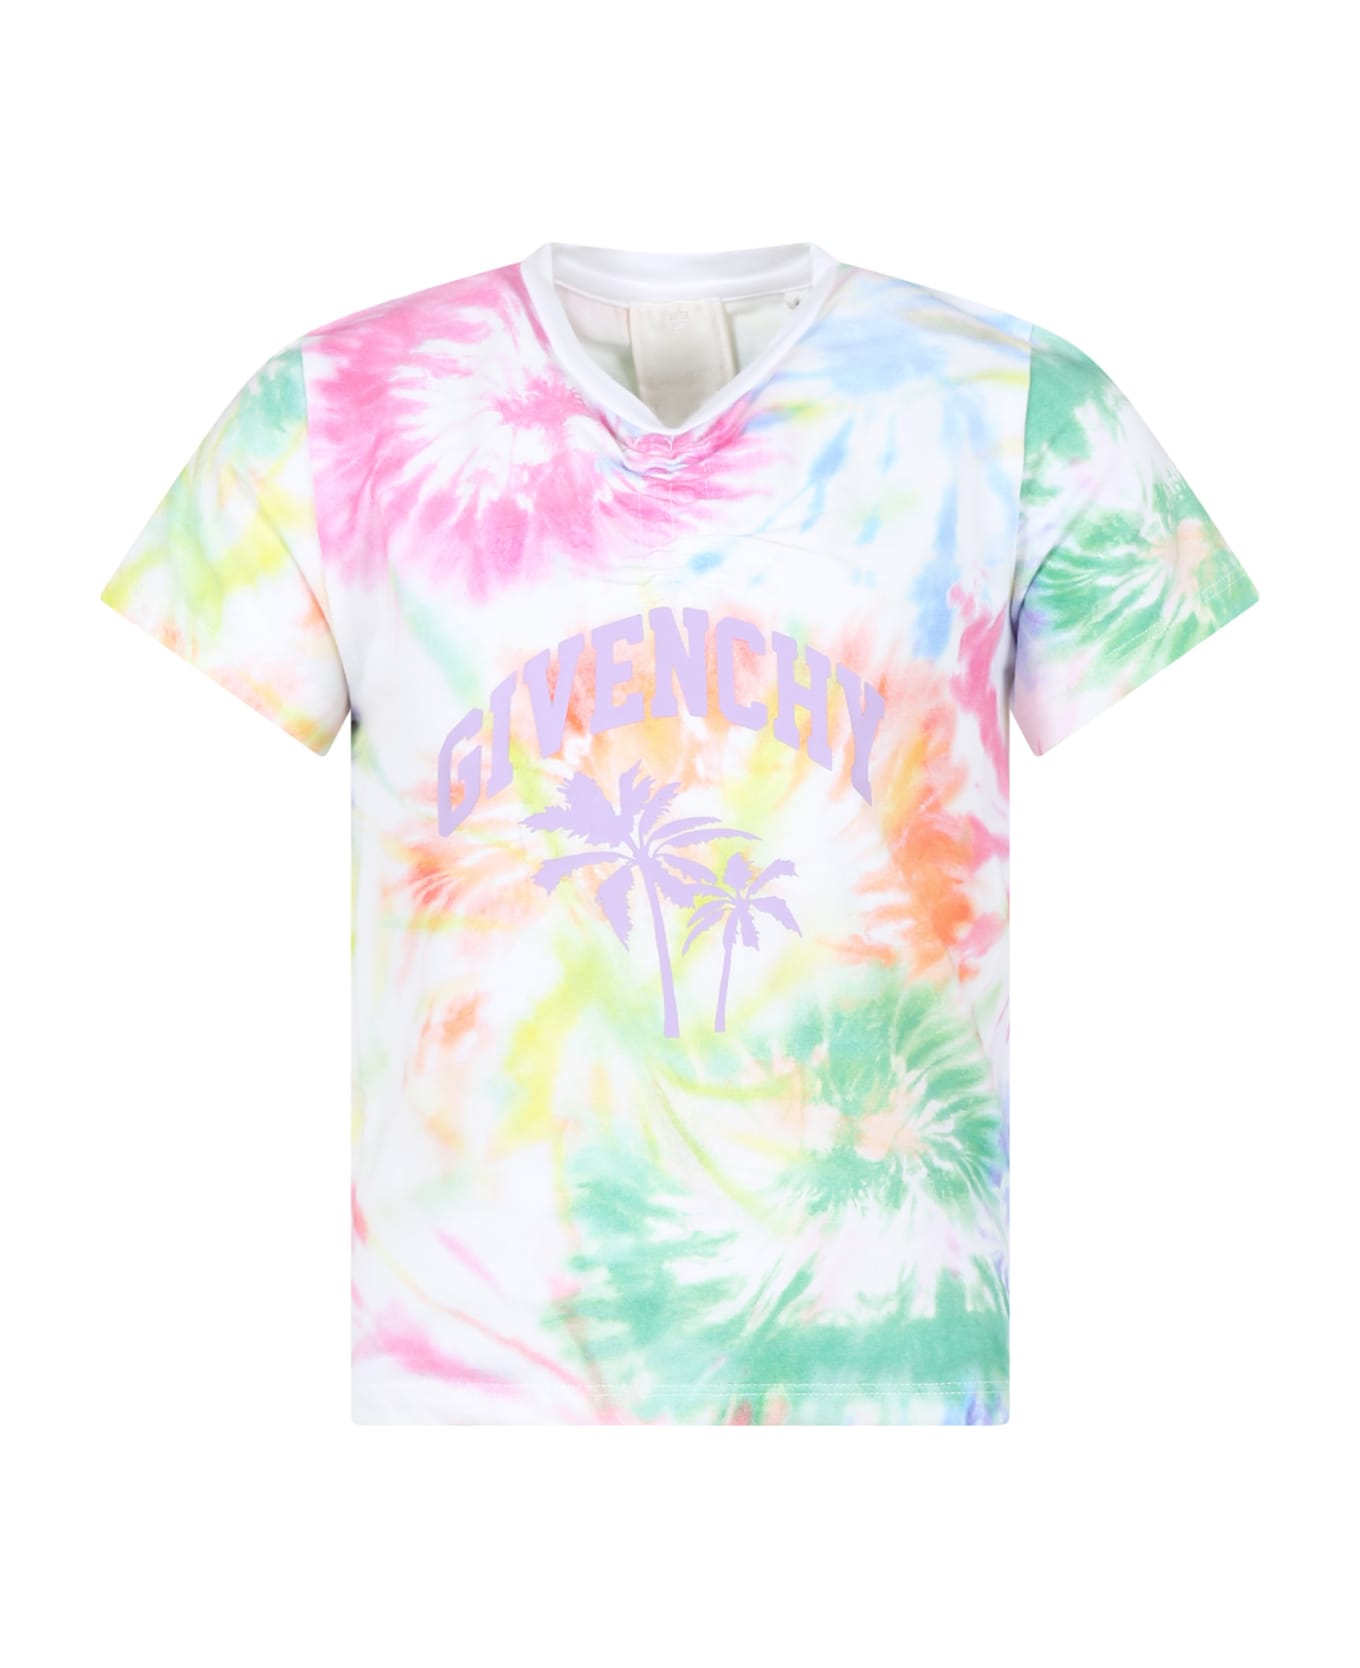 Givenchy Multicolor T-shirt For Girl With Tie Dye Print - Multicolor